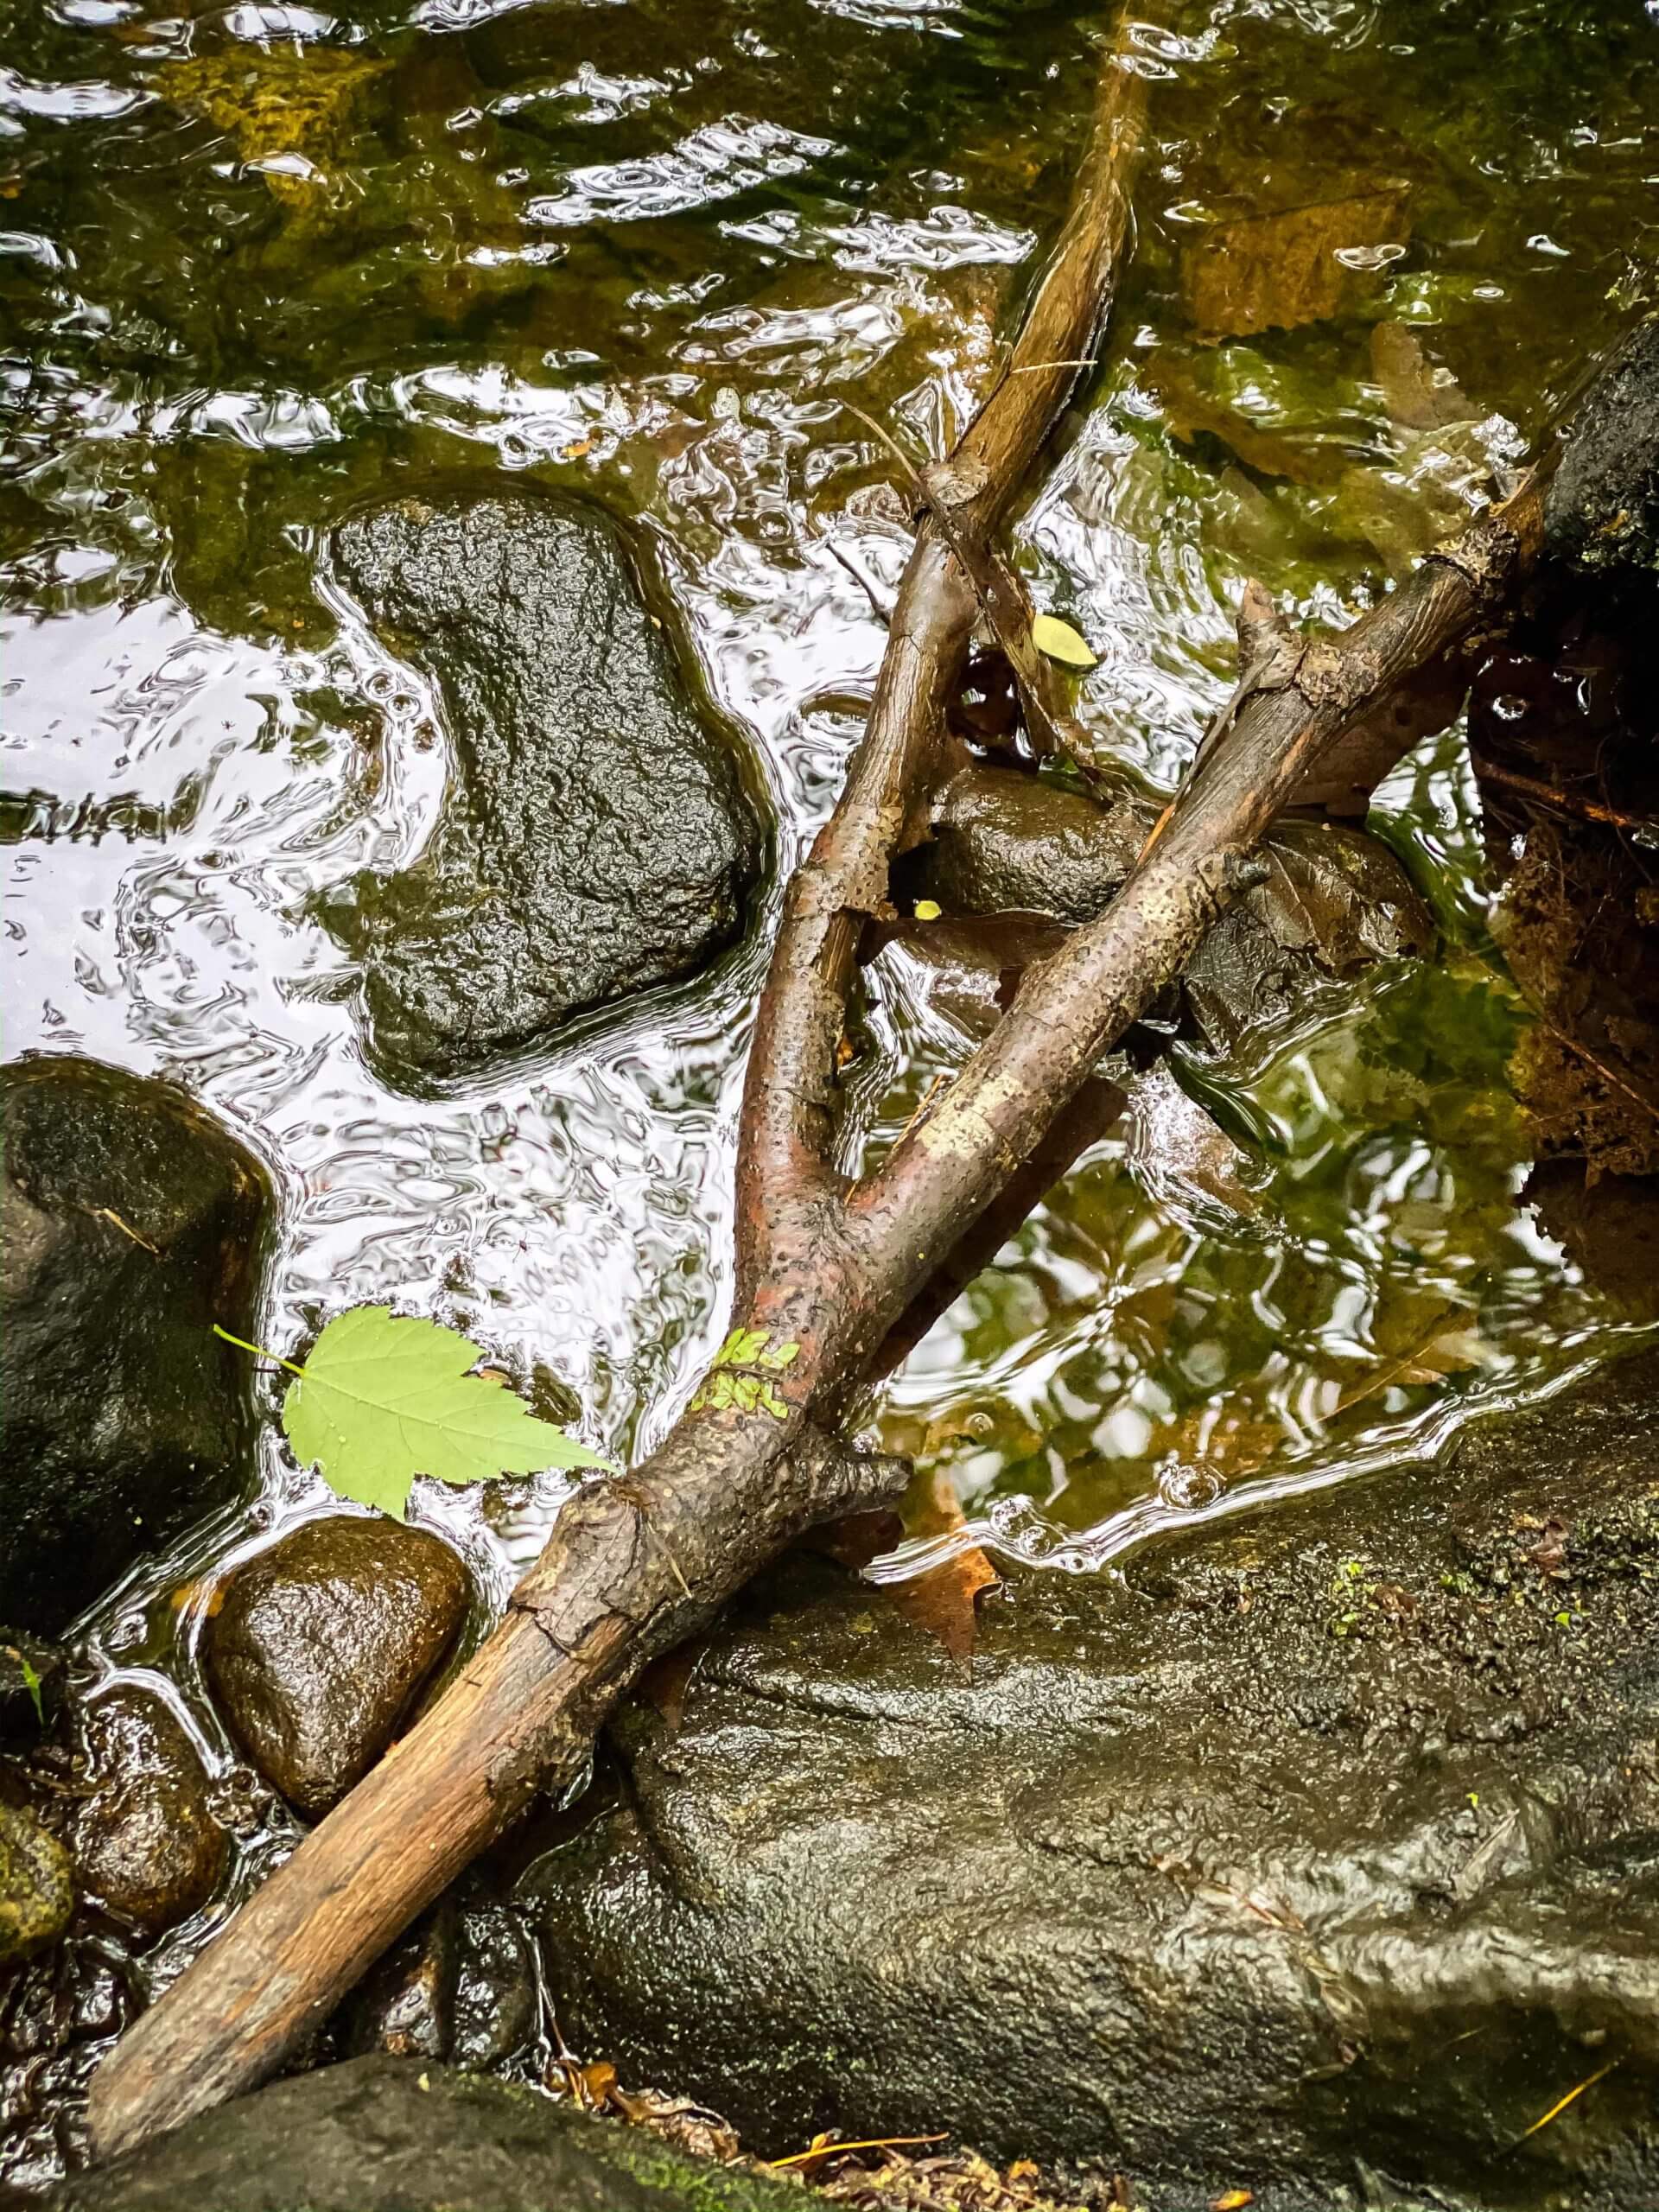 A tree branch is stuck between rocks and stones in a shallow river.